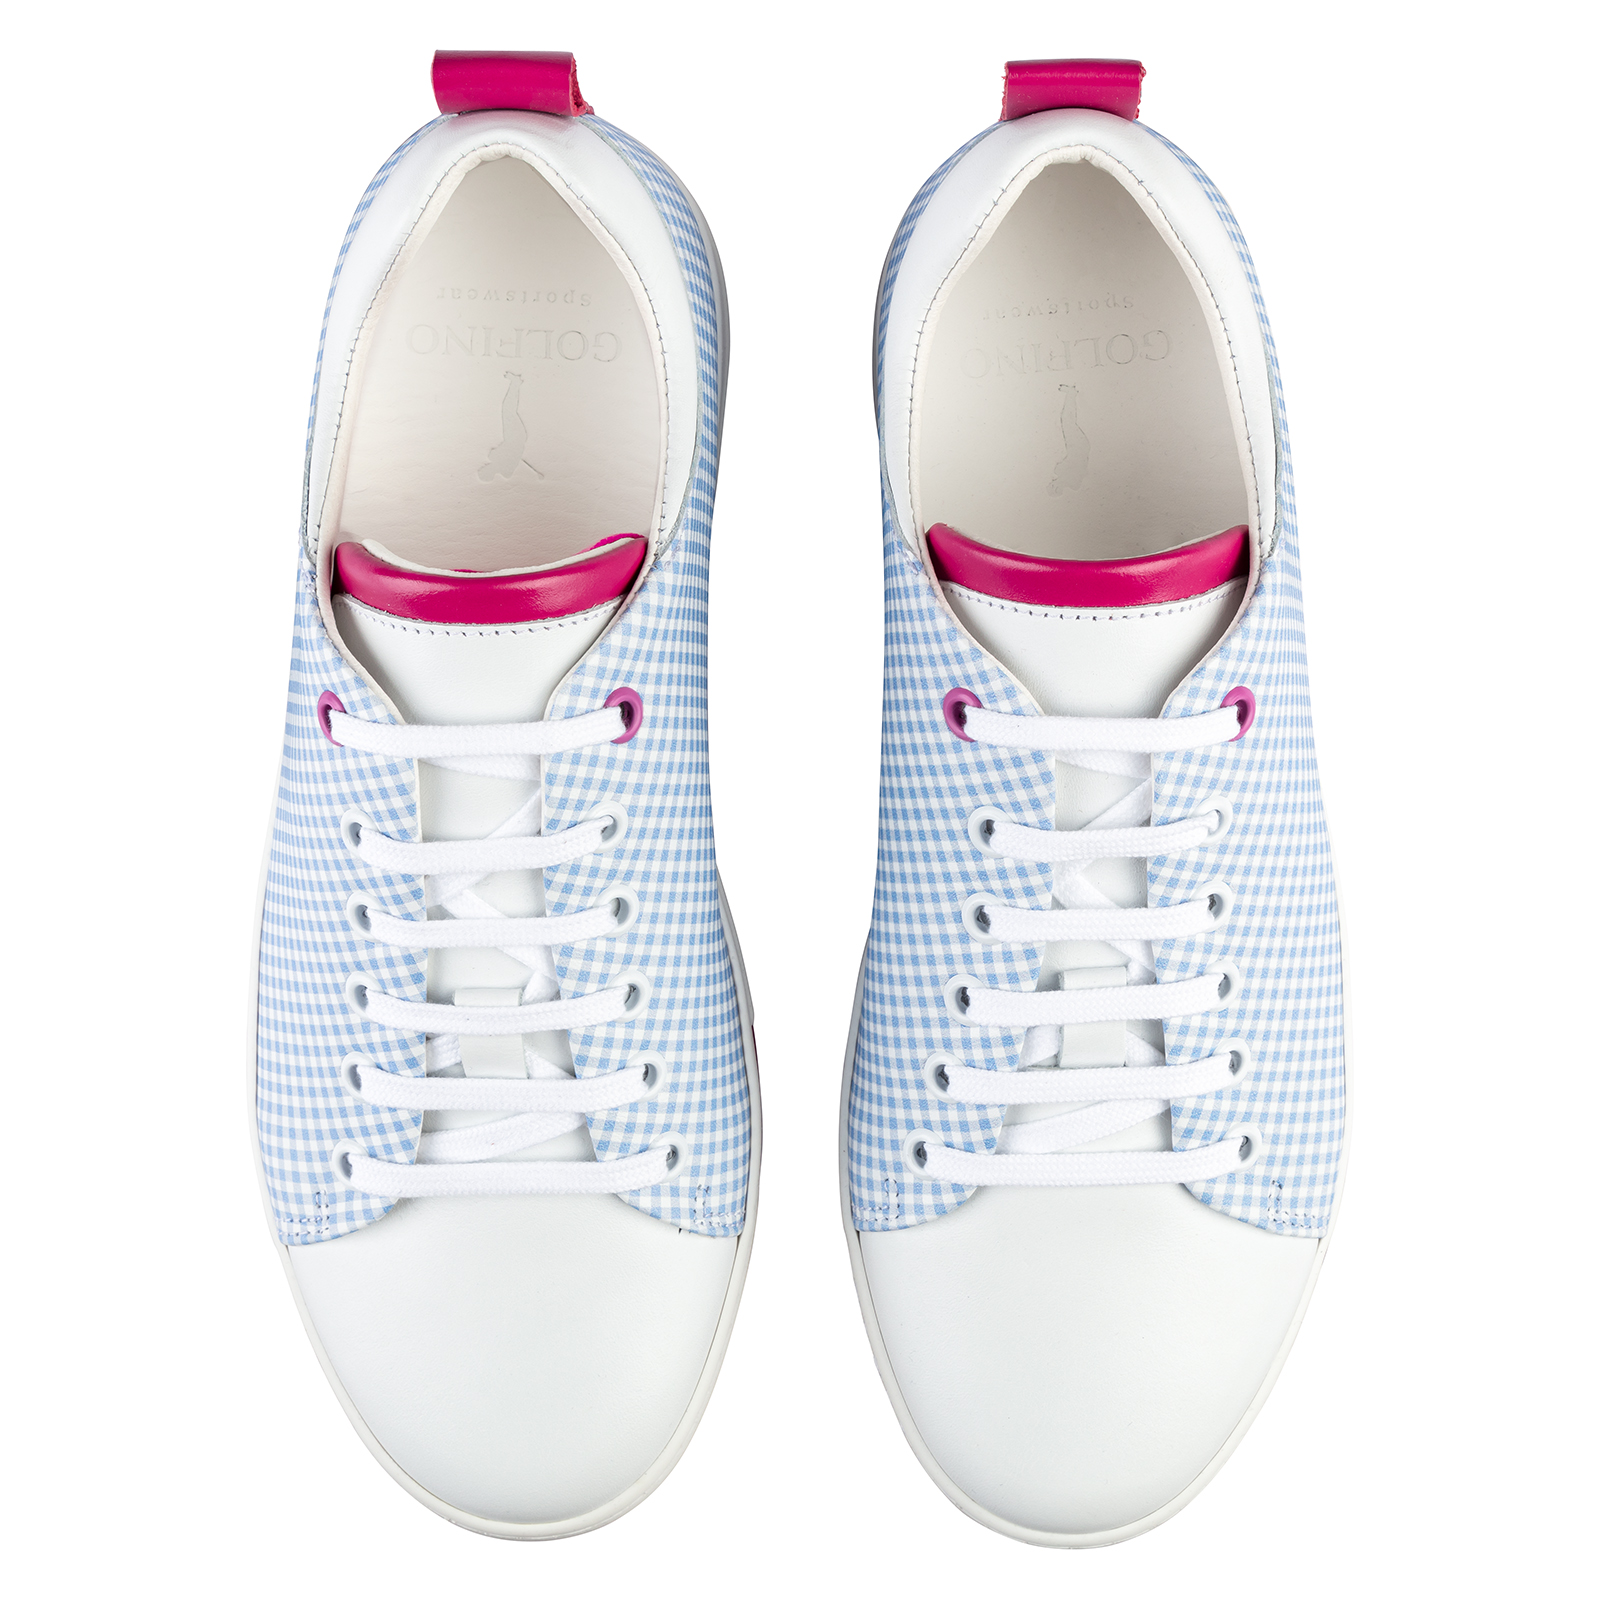 Ladies' stylish water-repellent genuine leather golf shoes